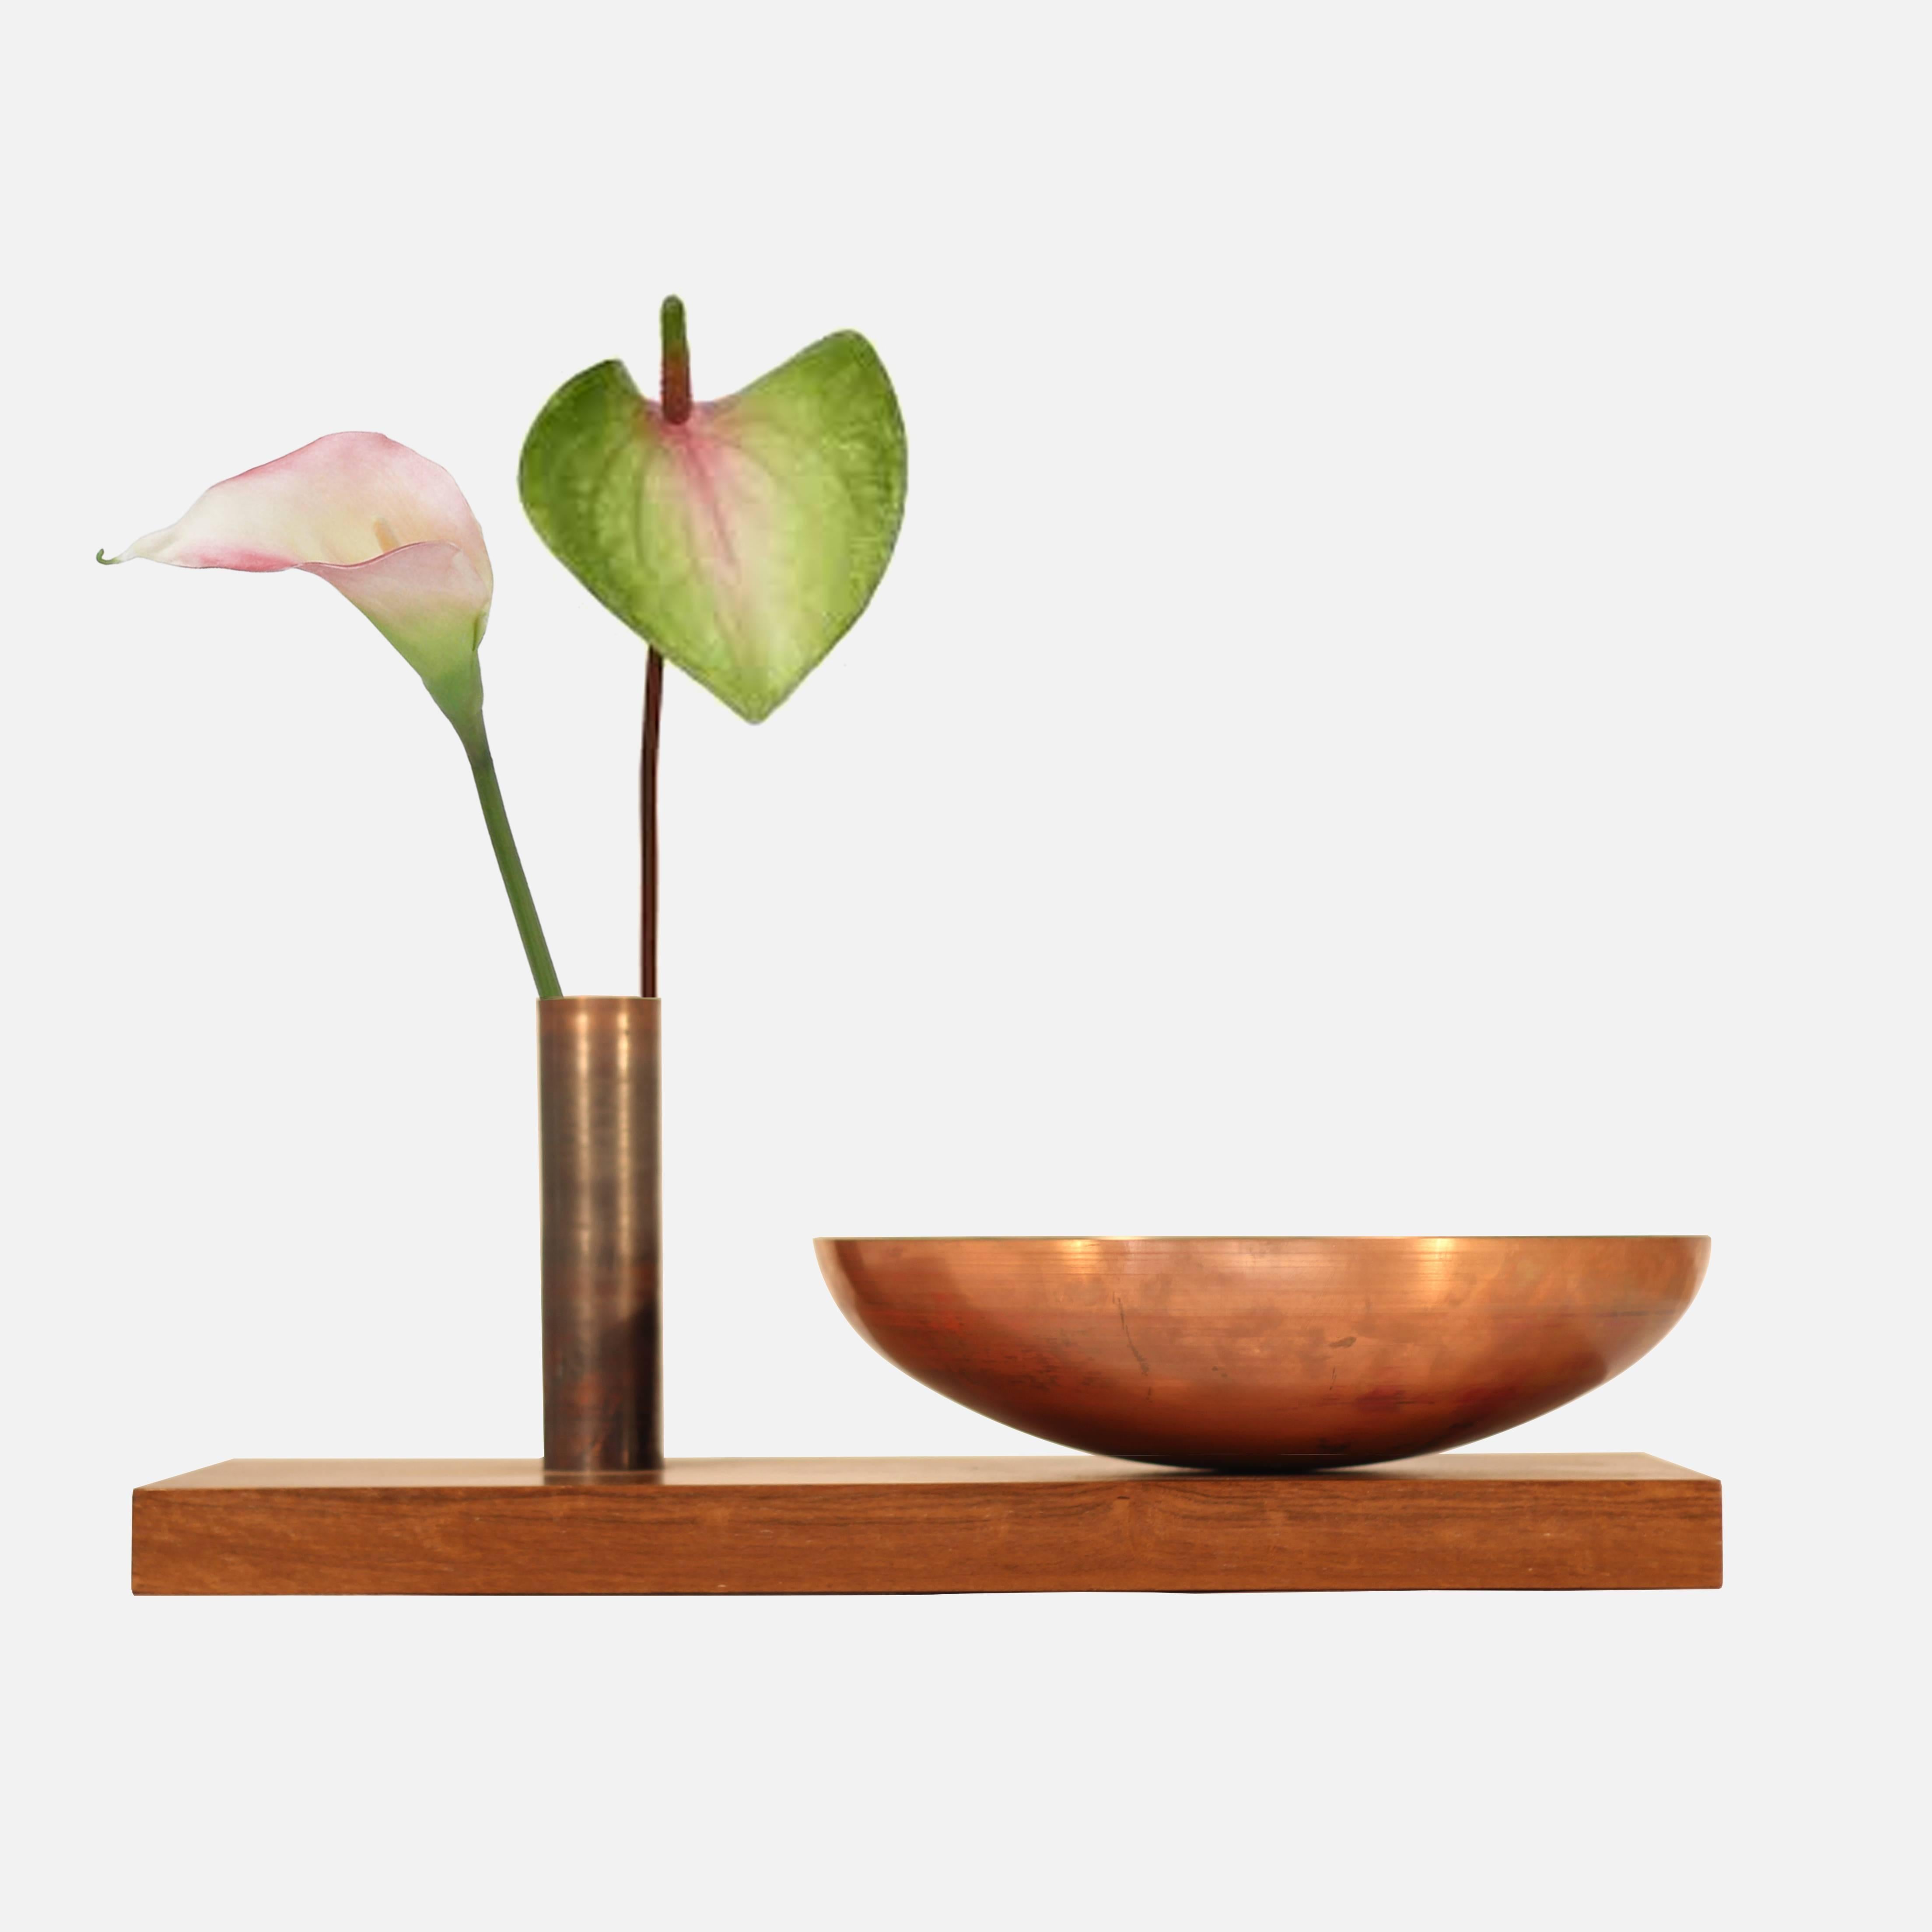 Copper and wood fruit bowl, Modern styled inspired with geometry than enhances raw excepcional and rare natural material and textures, imbuia and copper - By Brazilian Designer Maker Atelier BAM Design of São Paulo.
The modern design style is one of